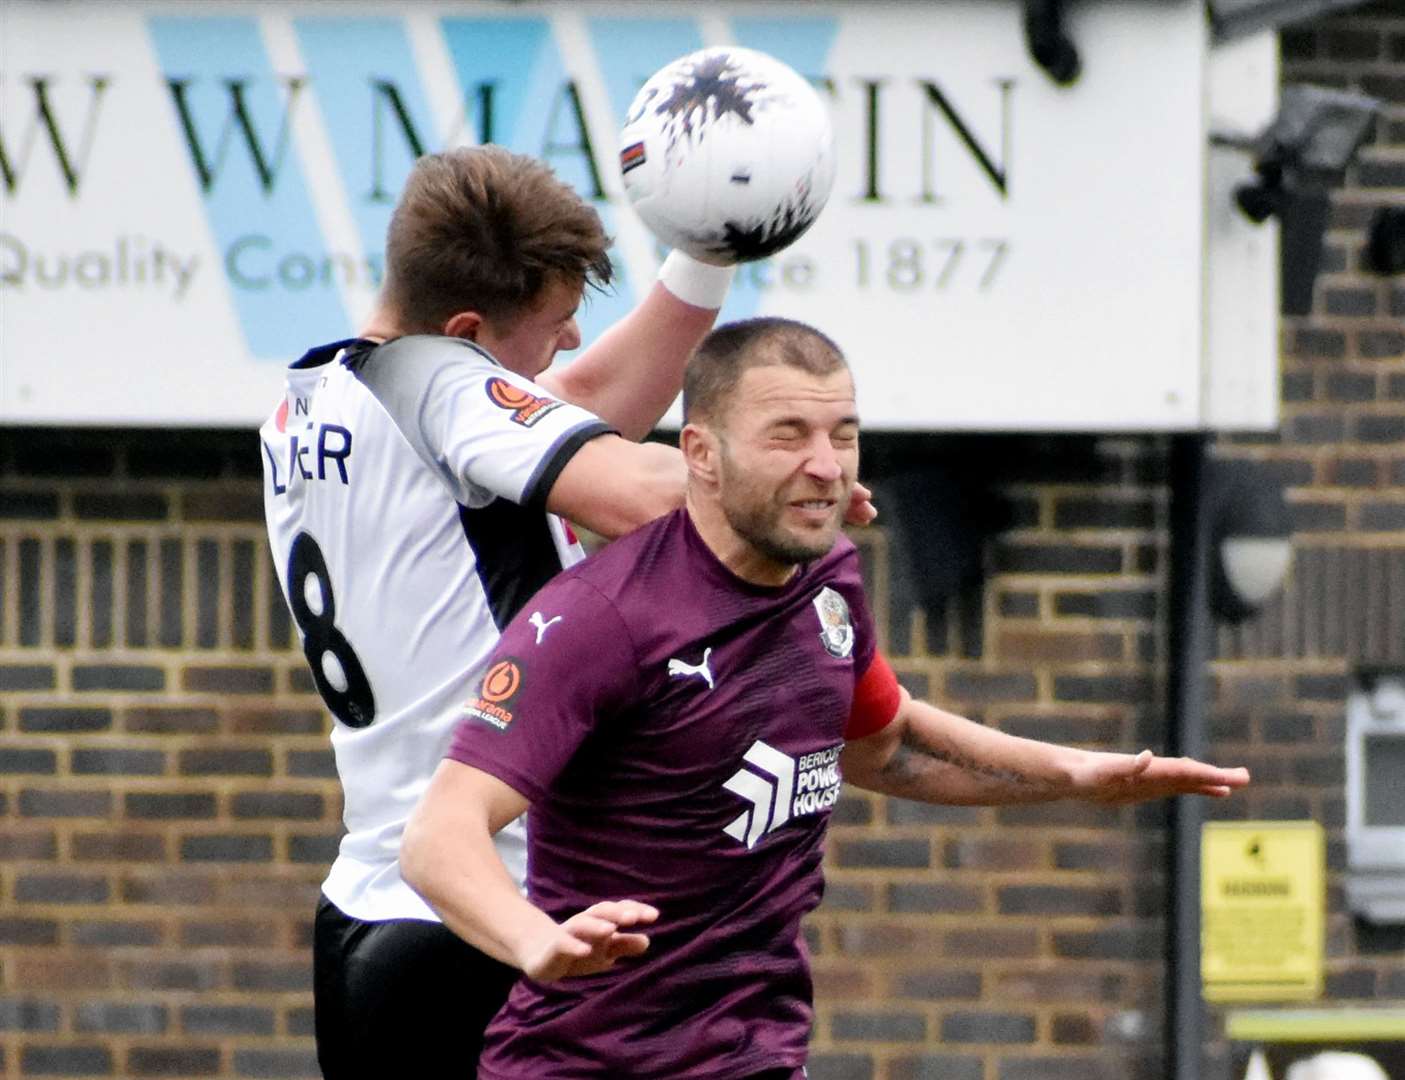 Dover's Freddie Oliver up against Dartford captain Luke Coulson in midfield during the Darts’ 2-1 National League South win on Saturday. Picture: Randolph File